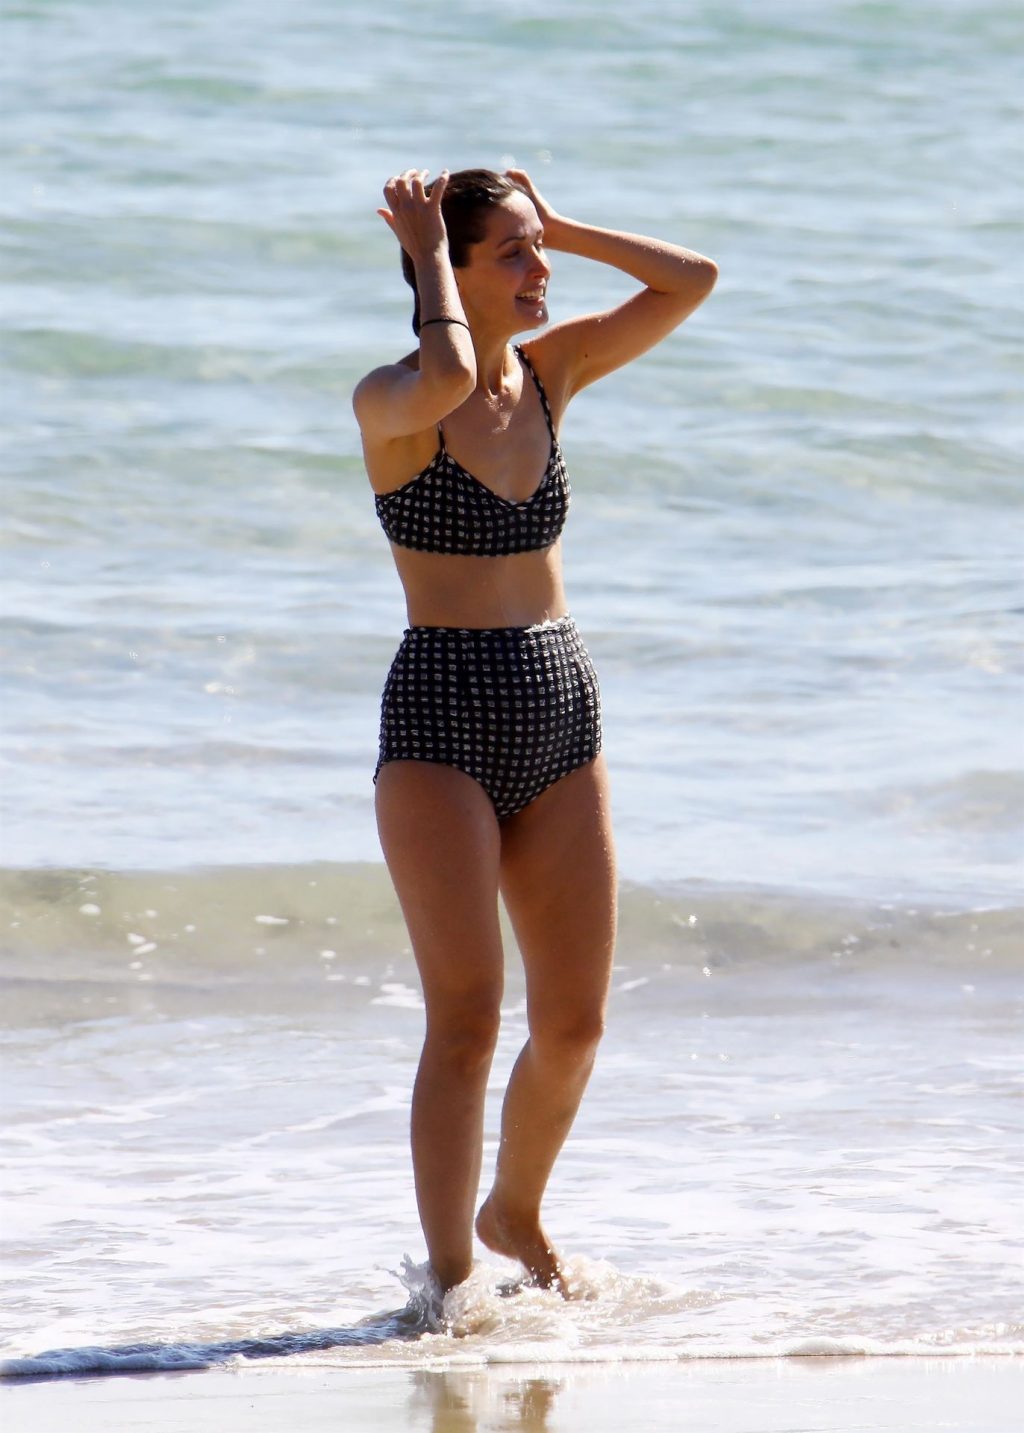 Rose Byrne Puts Her Fit Figure on Display in a Bikini in Byron Bay (26 Photos)